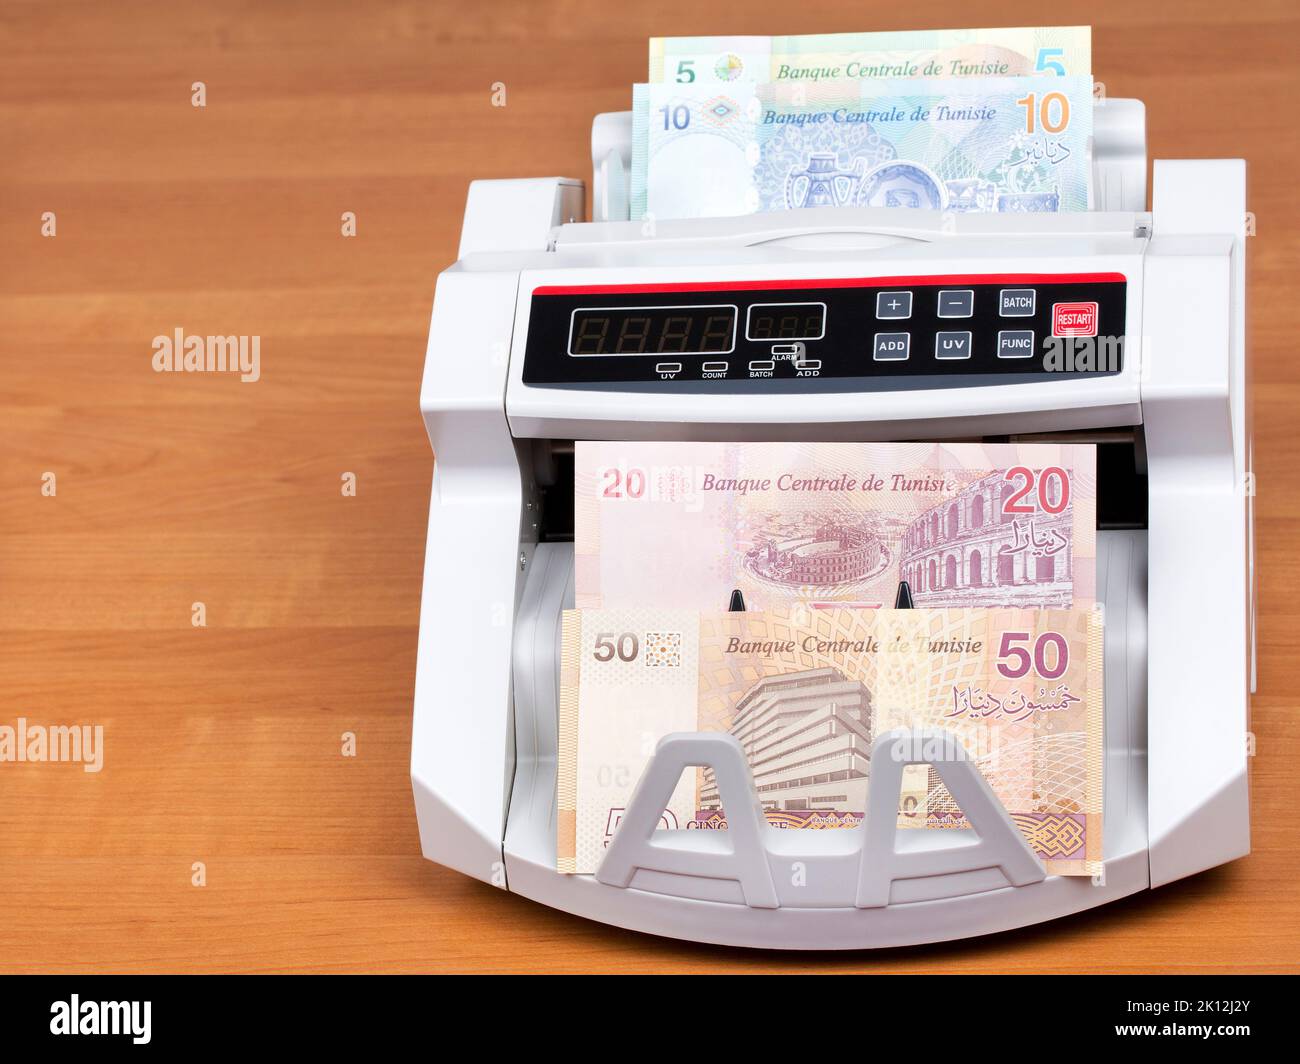 Tunisian money - Dinars in a counting machine Stock Photo